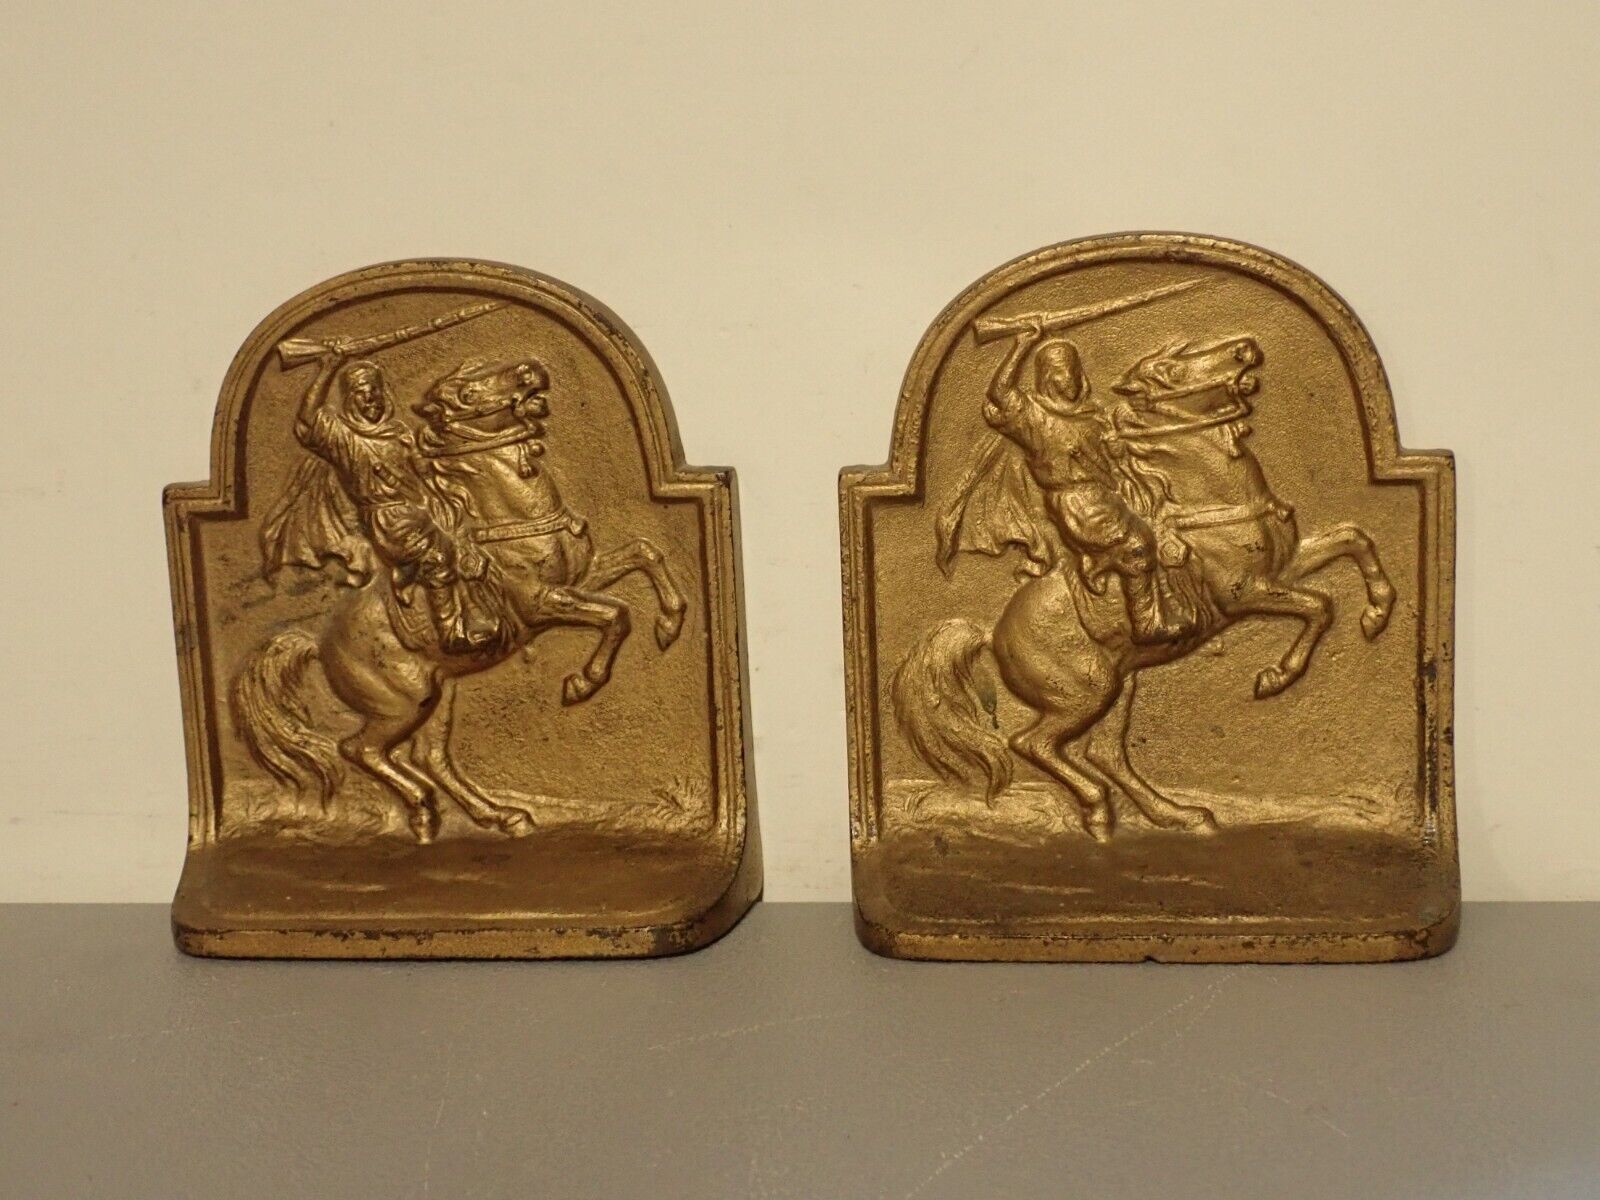 Ottoman Warrior 1920s Bookends, Hubley, Cast Iron Gold Finish